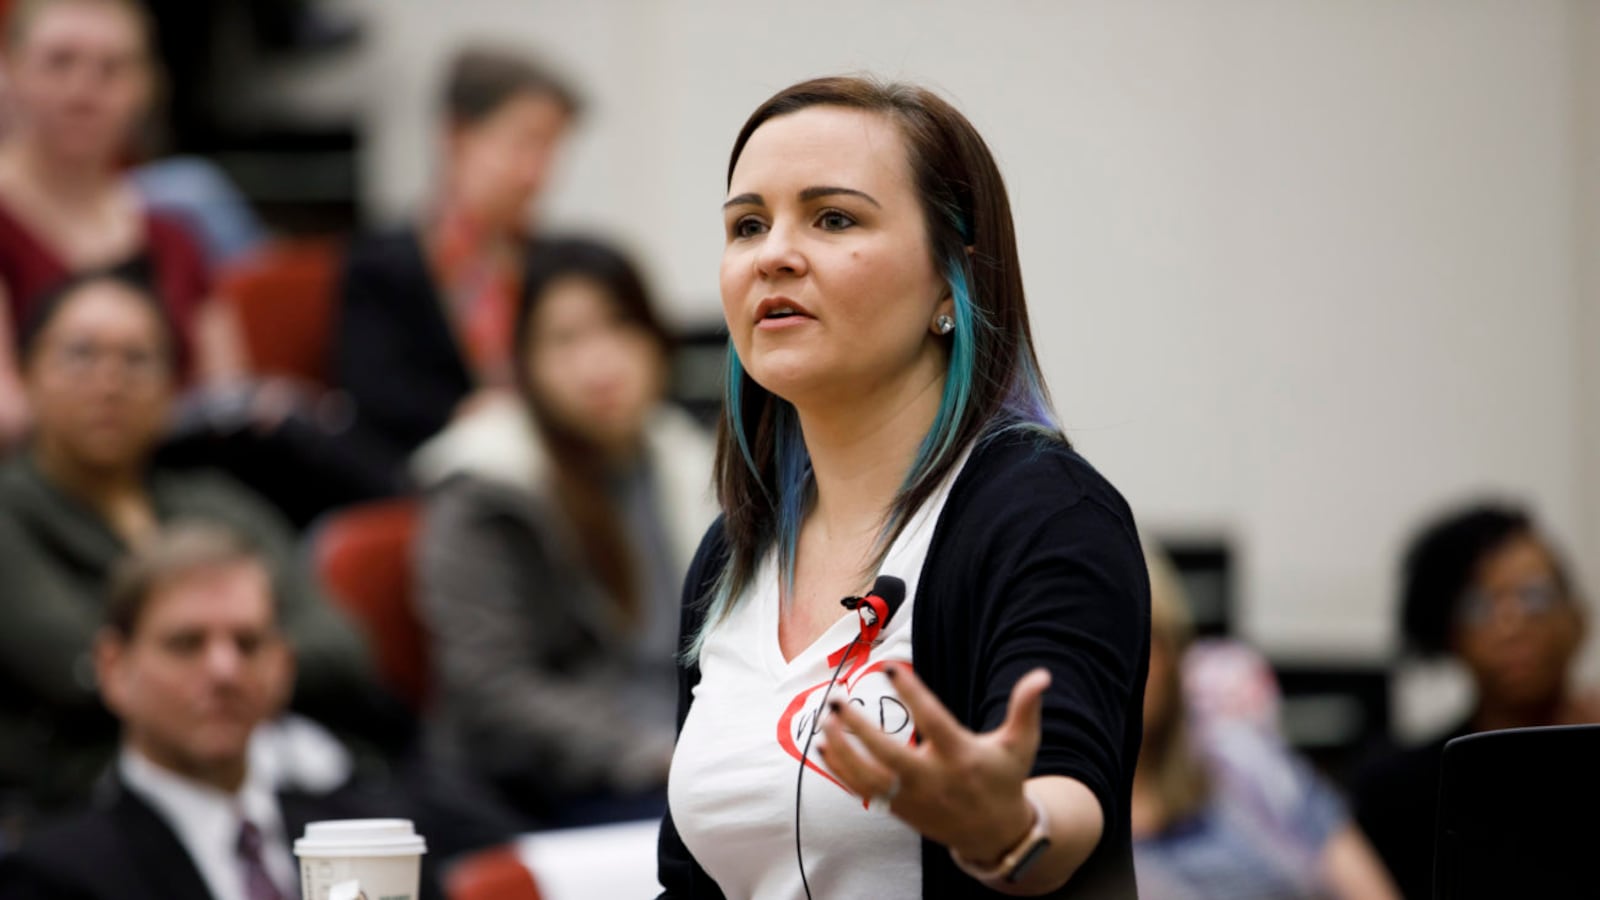 Indiana University alumna Katherine Posada, an English teacher at Marjory Stoneman Douglas High School, speaks to IU School of Education students on Friday, Feb. 23, 2018. Posada survived a mass shooting at the Parkland, Florida school where 17 students and teachers were killed by a former student.